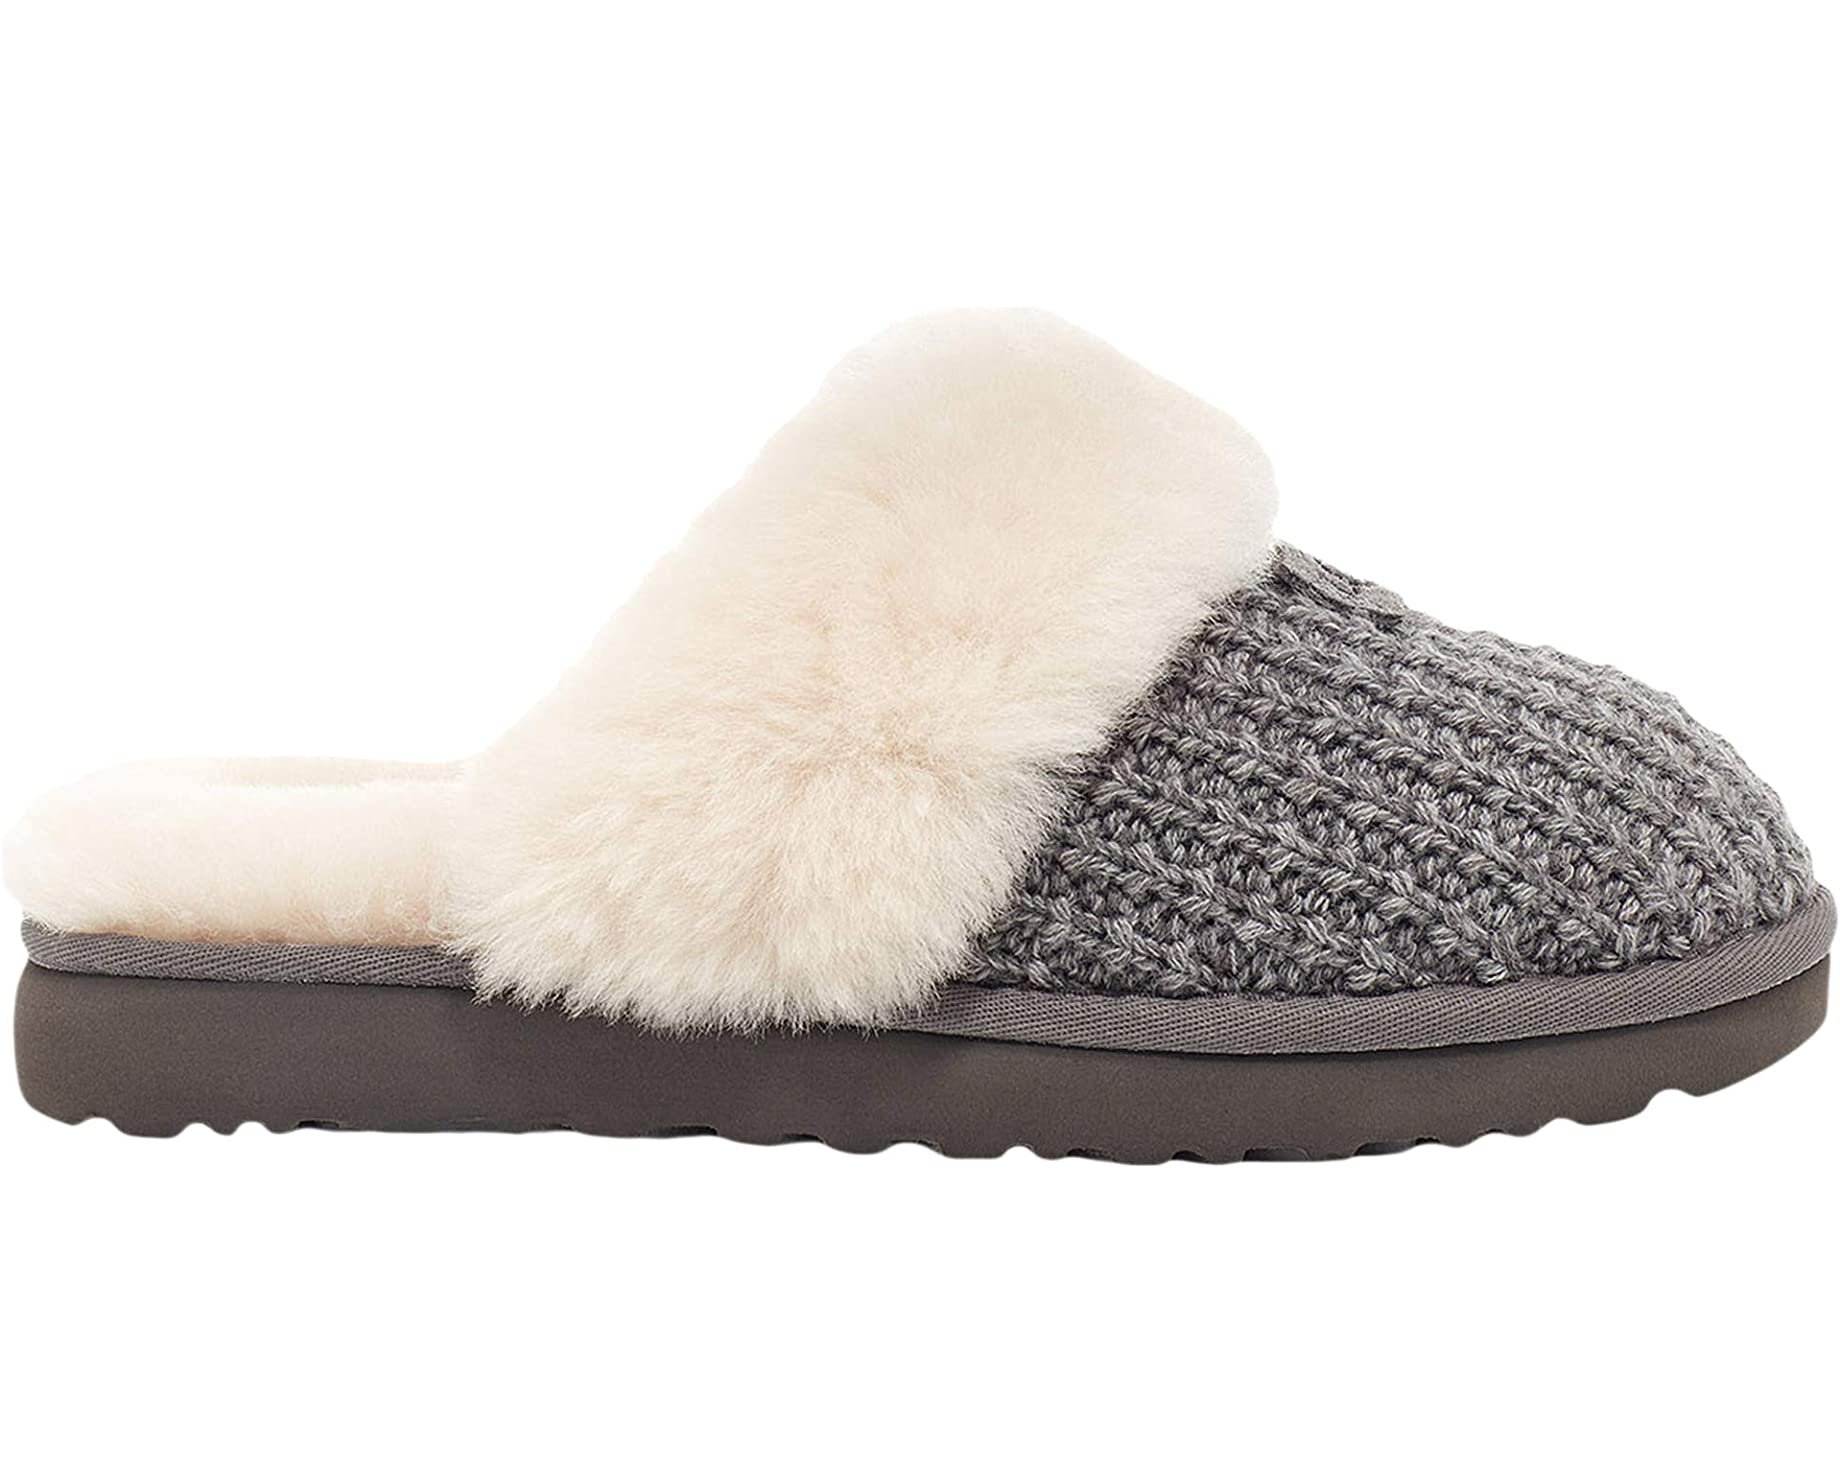 A soft, sweater-knit upper and lush sheepskin lining add softness and style to this outdoor-friendly slipper. Featuring a fluffy collar and super-light, durable sole, it slips on with Saturday sweats, faded denim, or your favorite knit pieces.